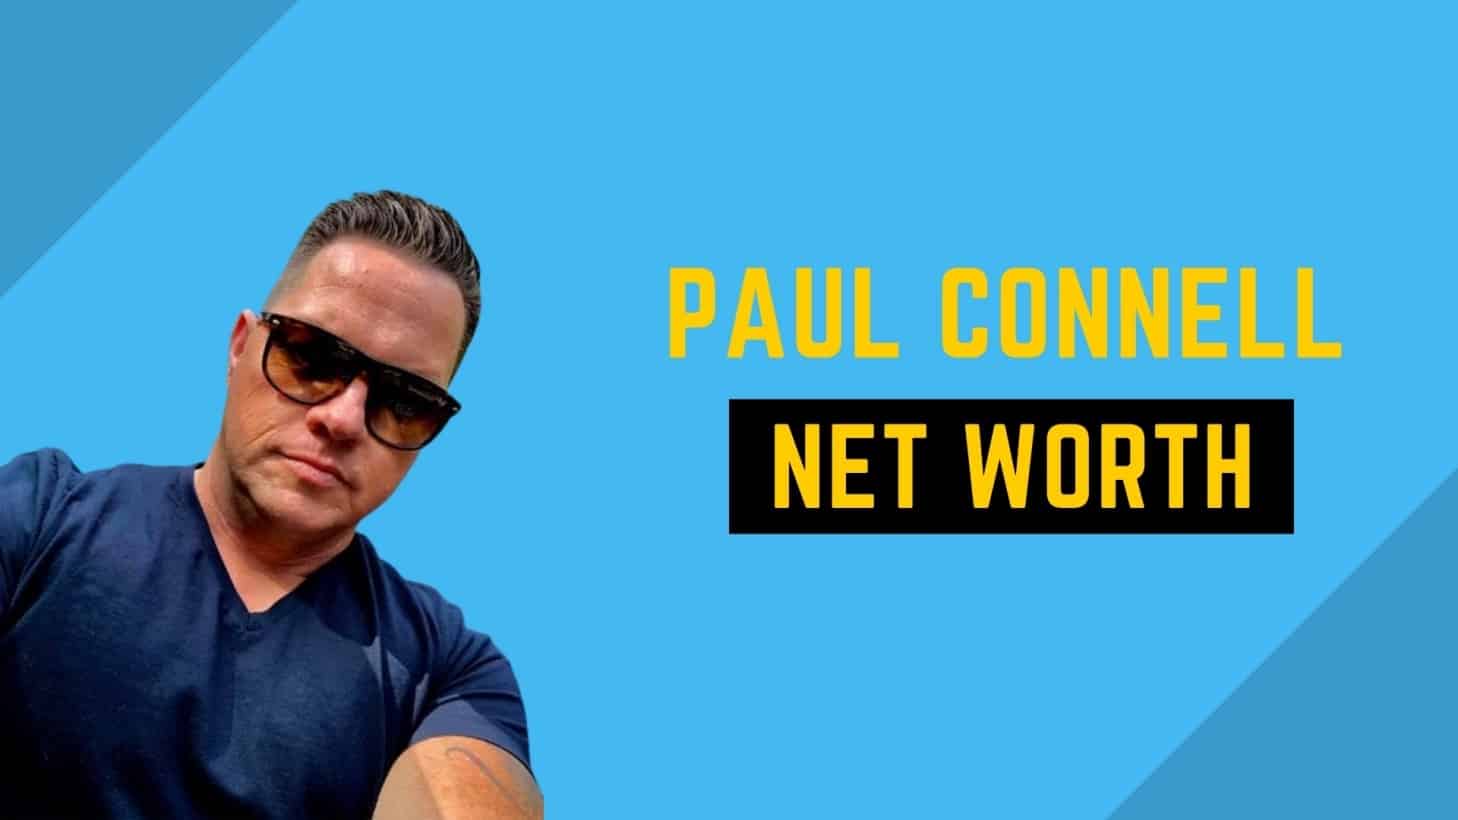 Paul Connell Net worth